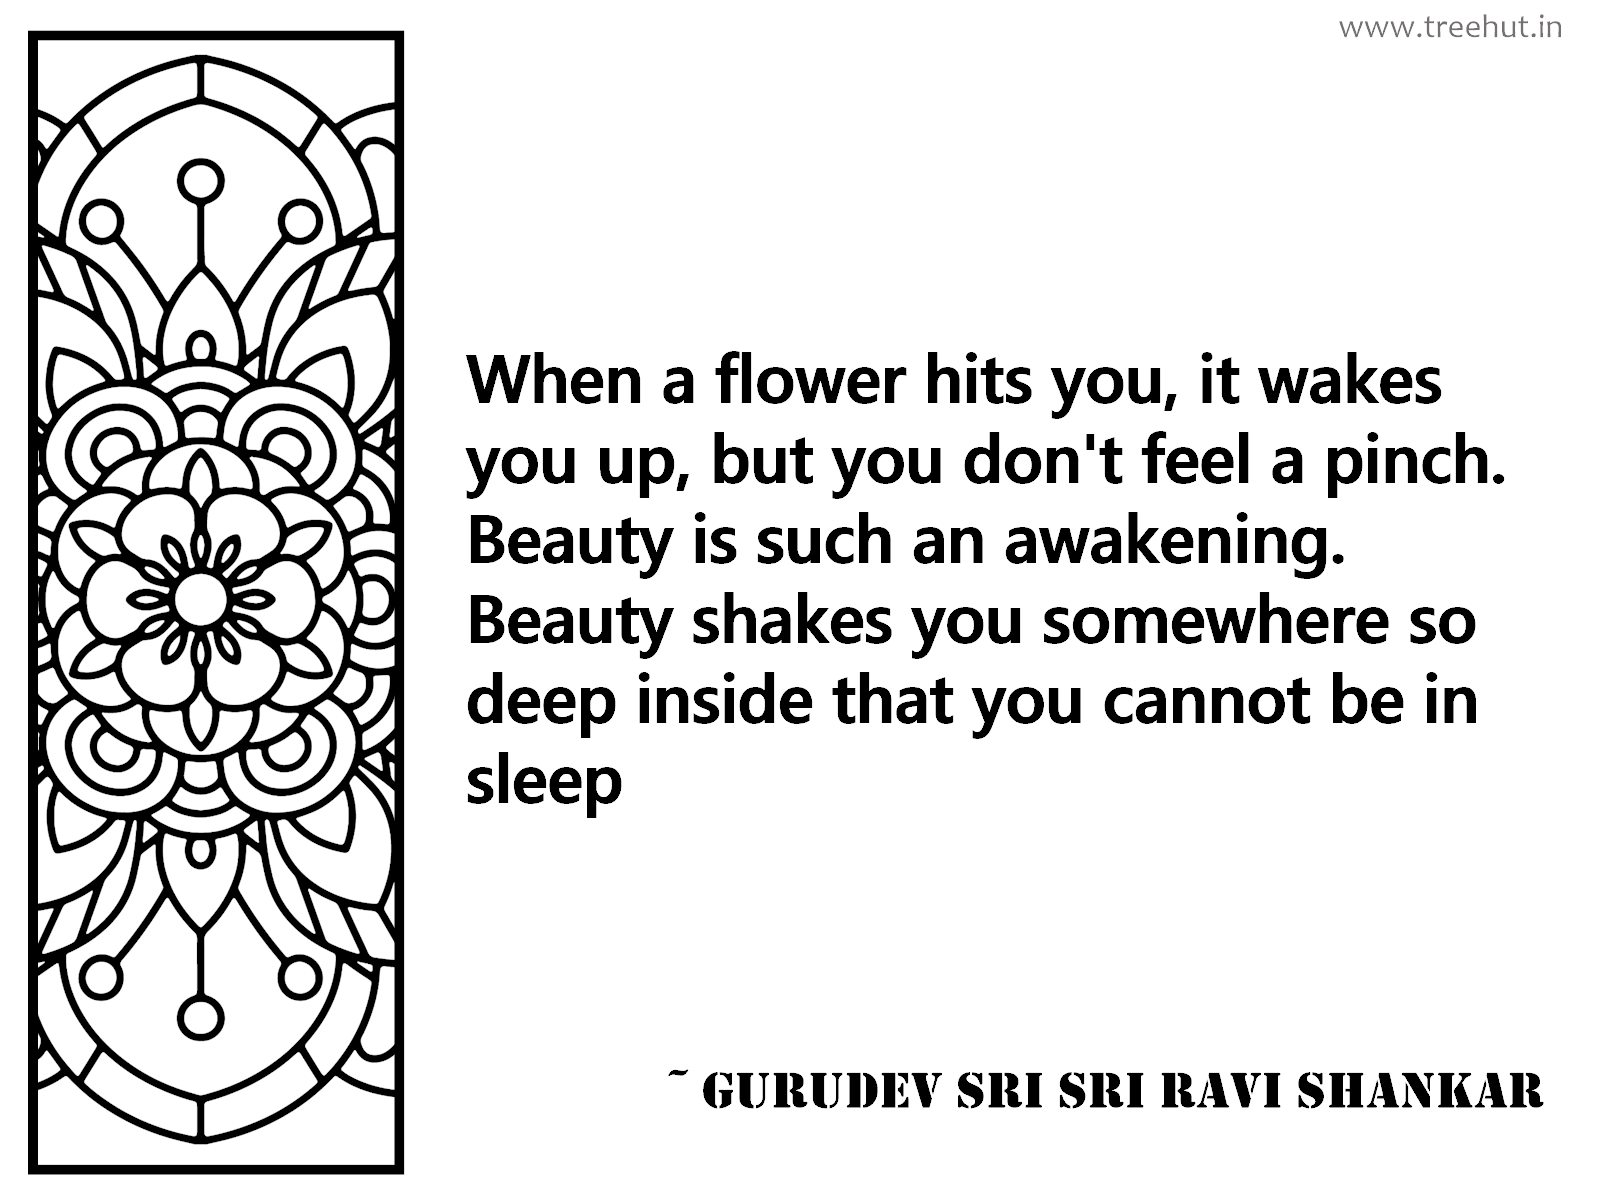 When a flower hits you, it wakes you up, but you don't feel a pinch. Beauty is such an awakening. Beauty shakes you somewhere so deep inside that you cannot be in sleep Inspirational Quote by Gurudev Sri Sri Ravi Shankar, coloring pages